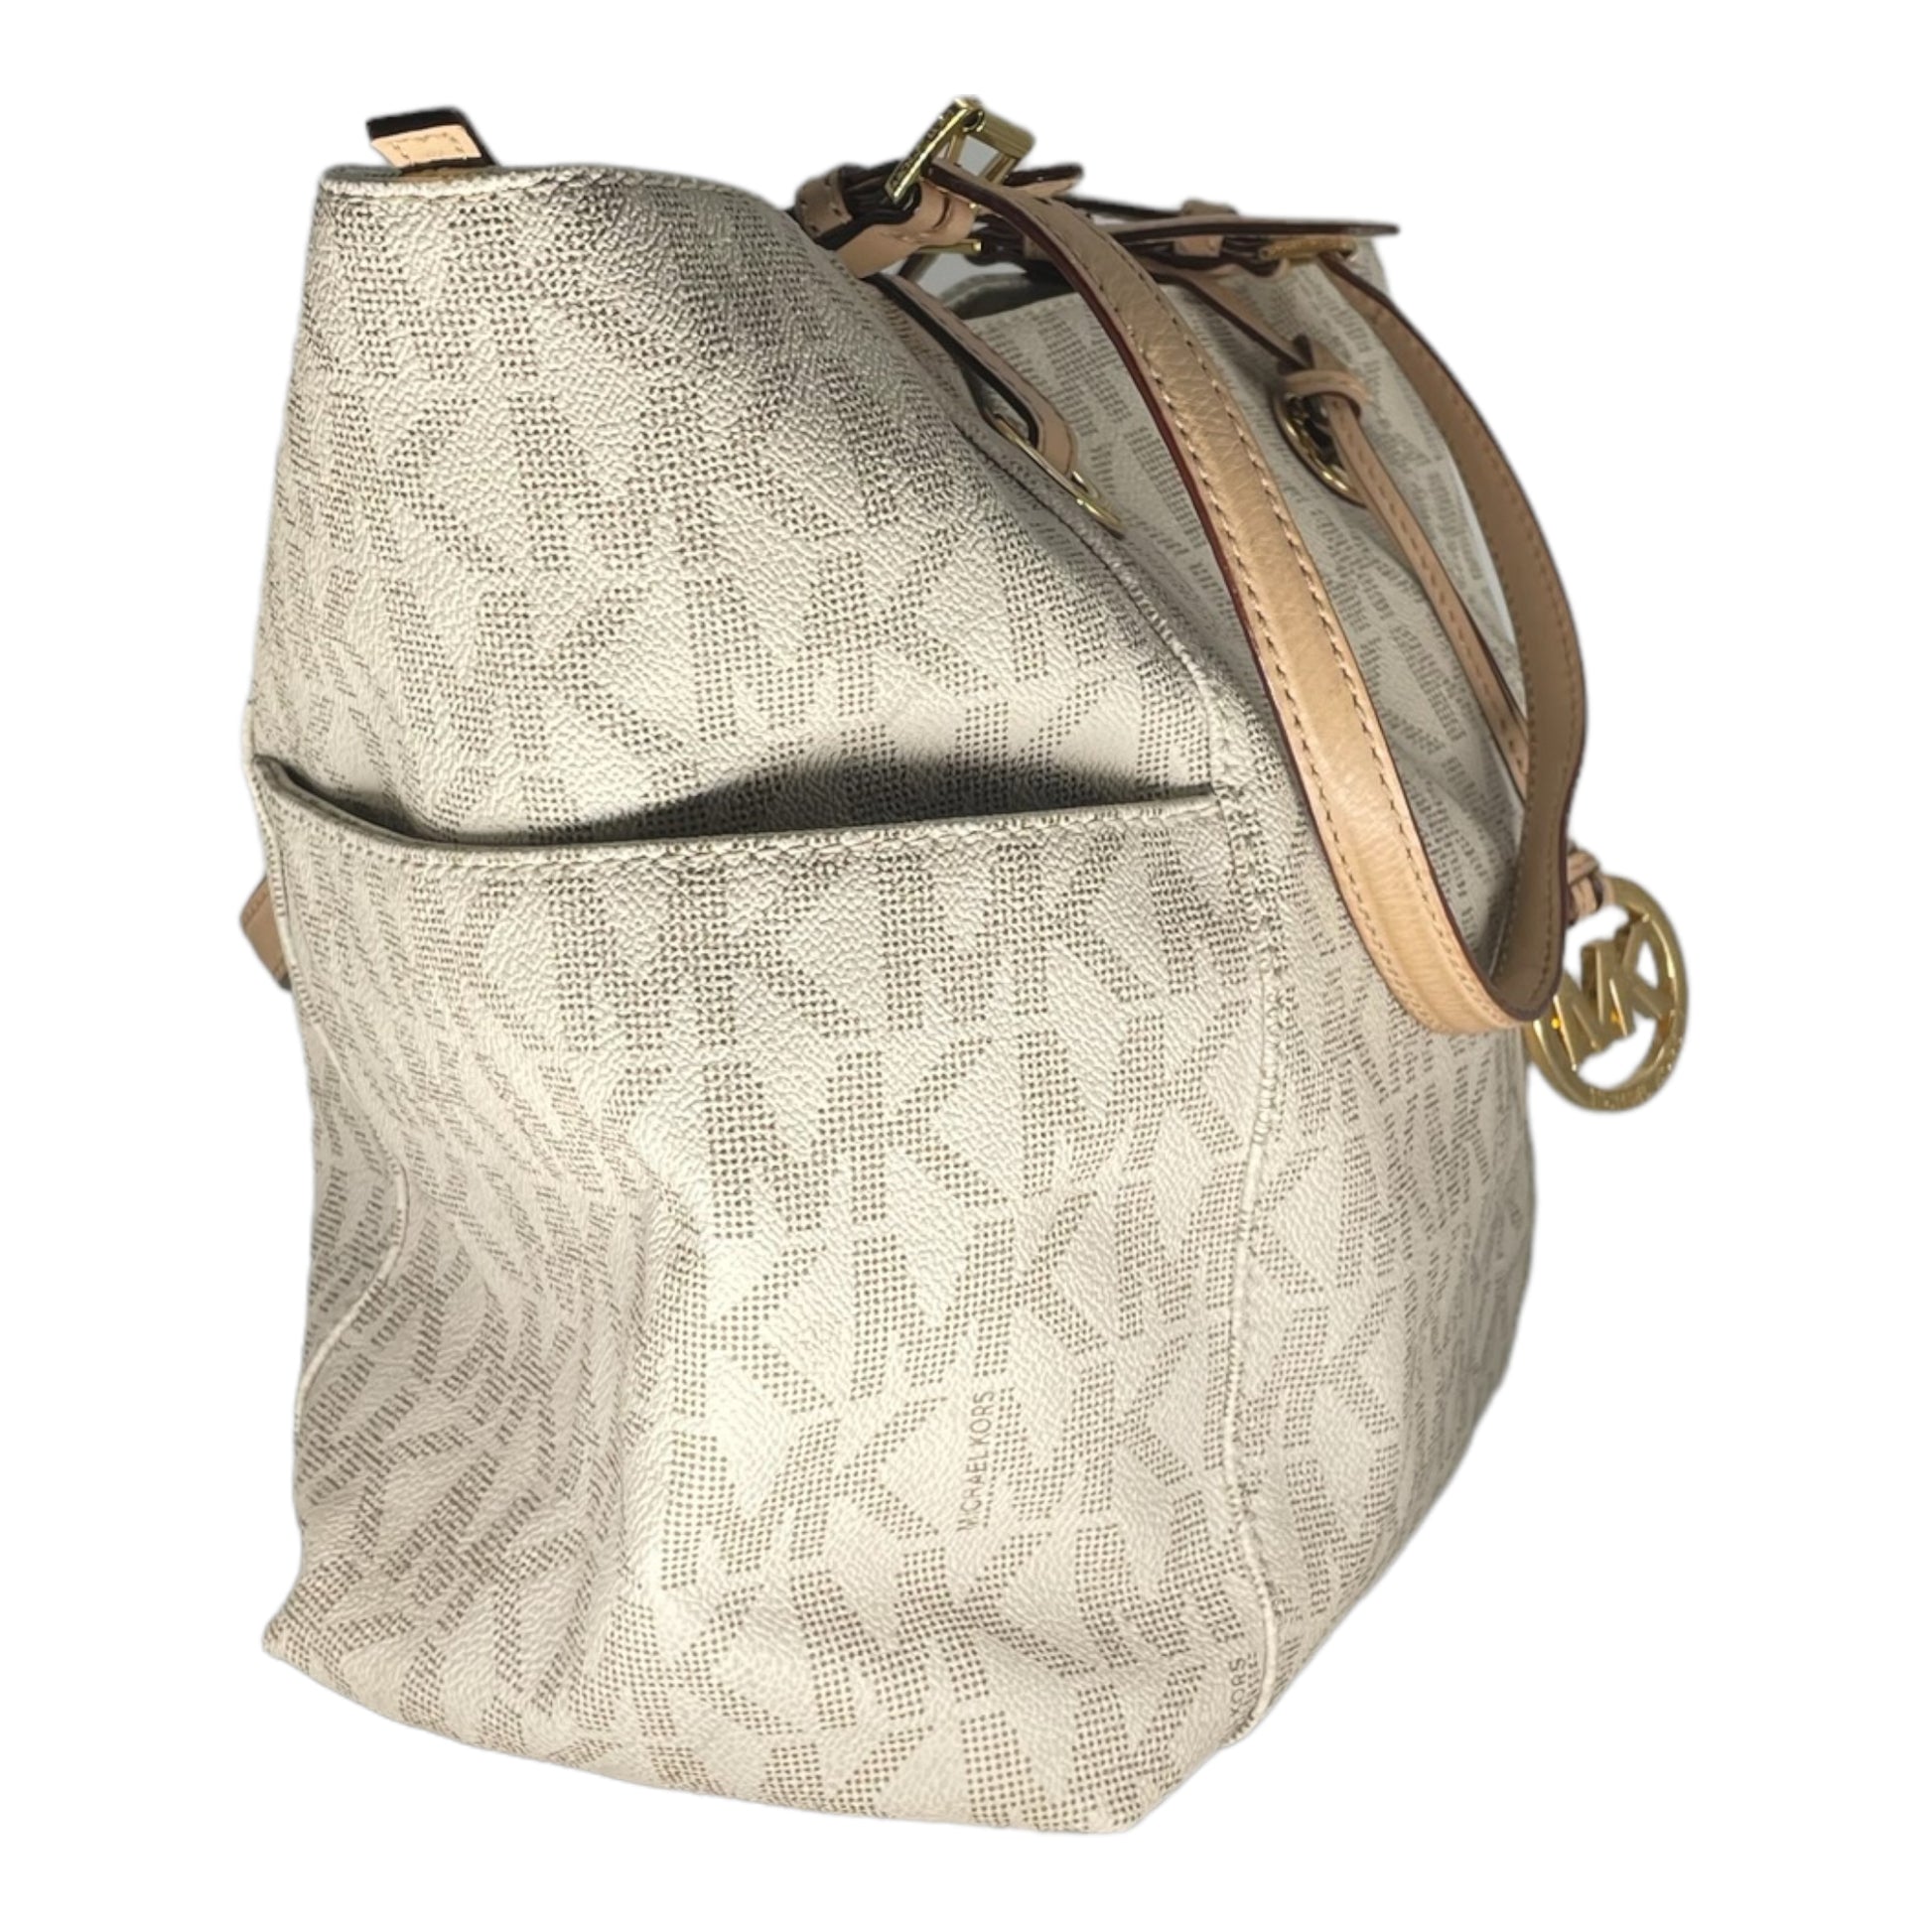 Michael Kors Brown/White Signature Coated Canvas and Leather Jet